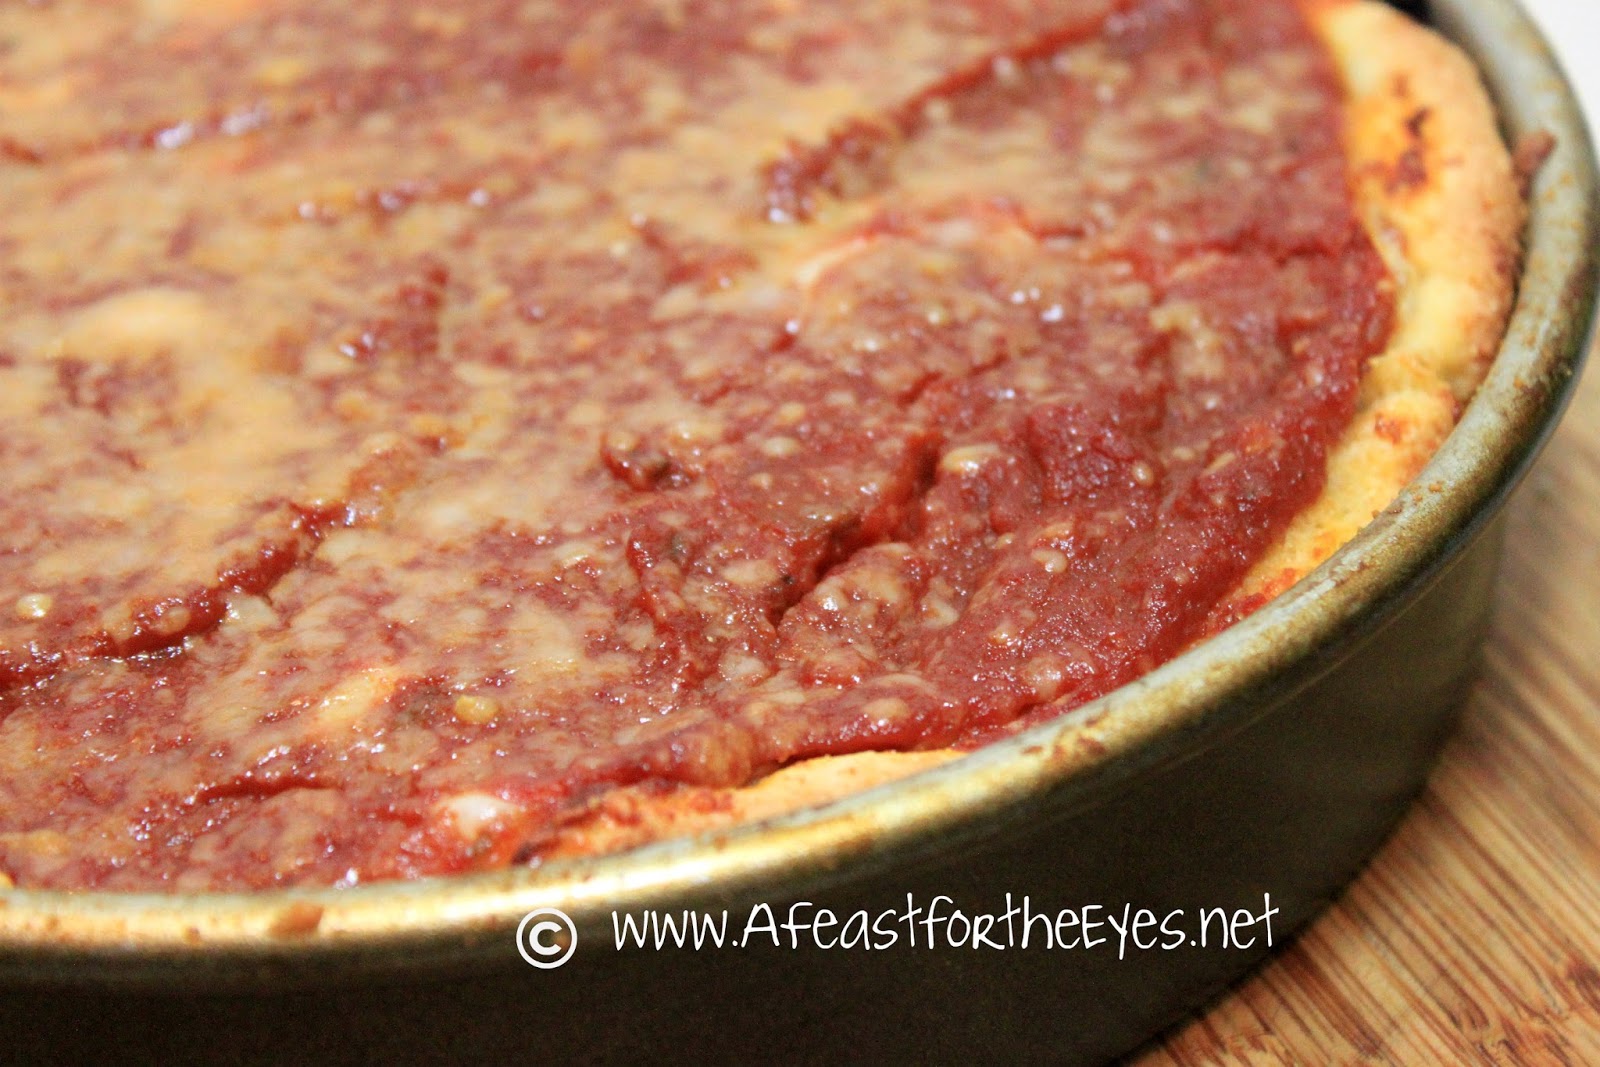 Chicago-Style Pan Pizza Recipe